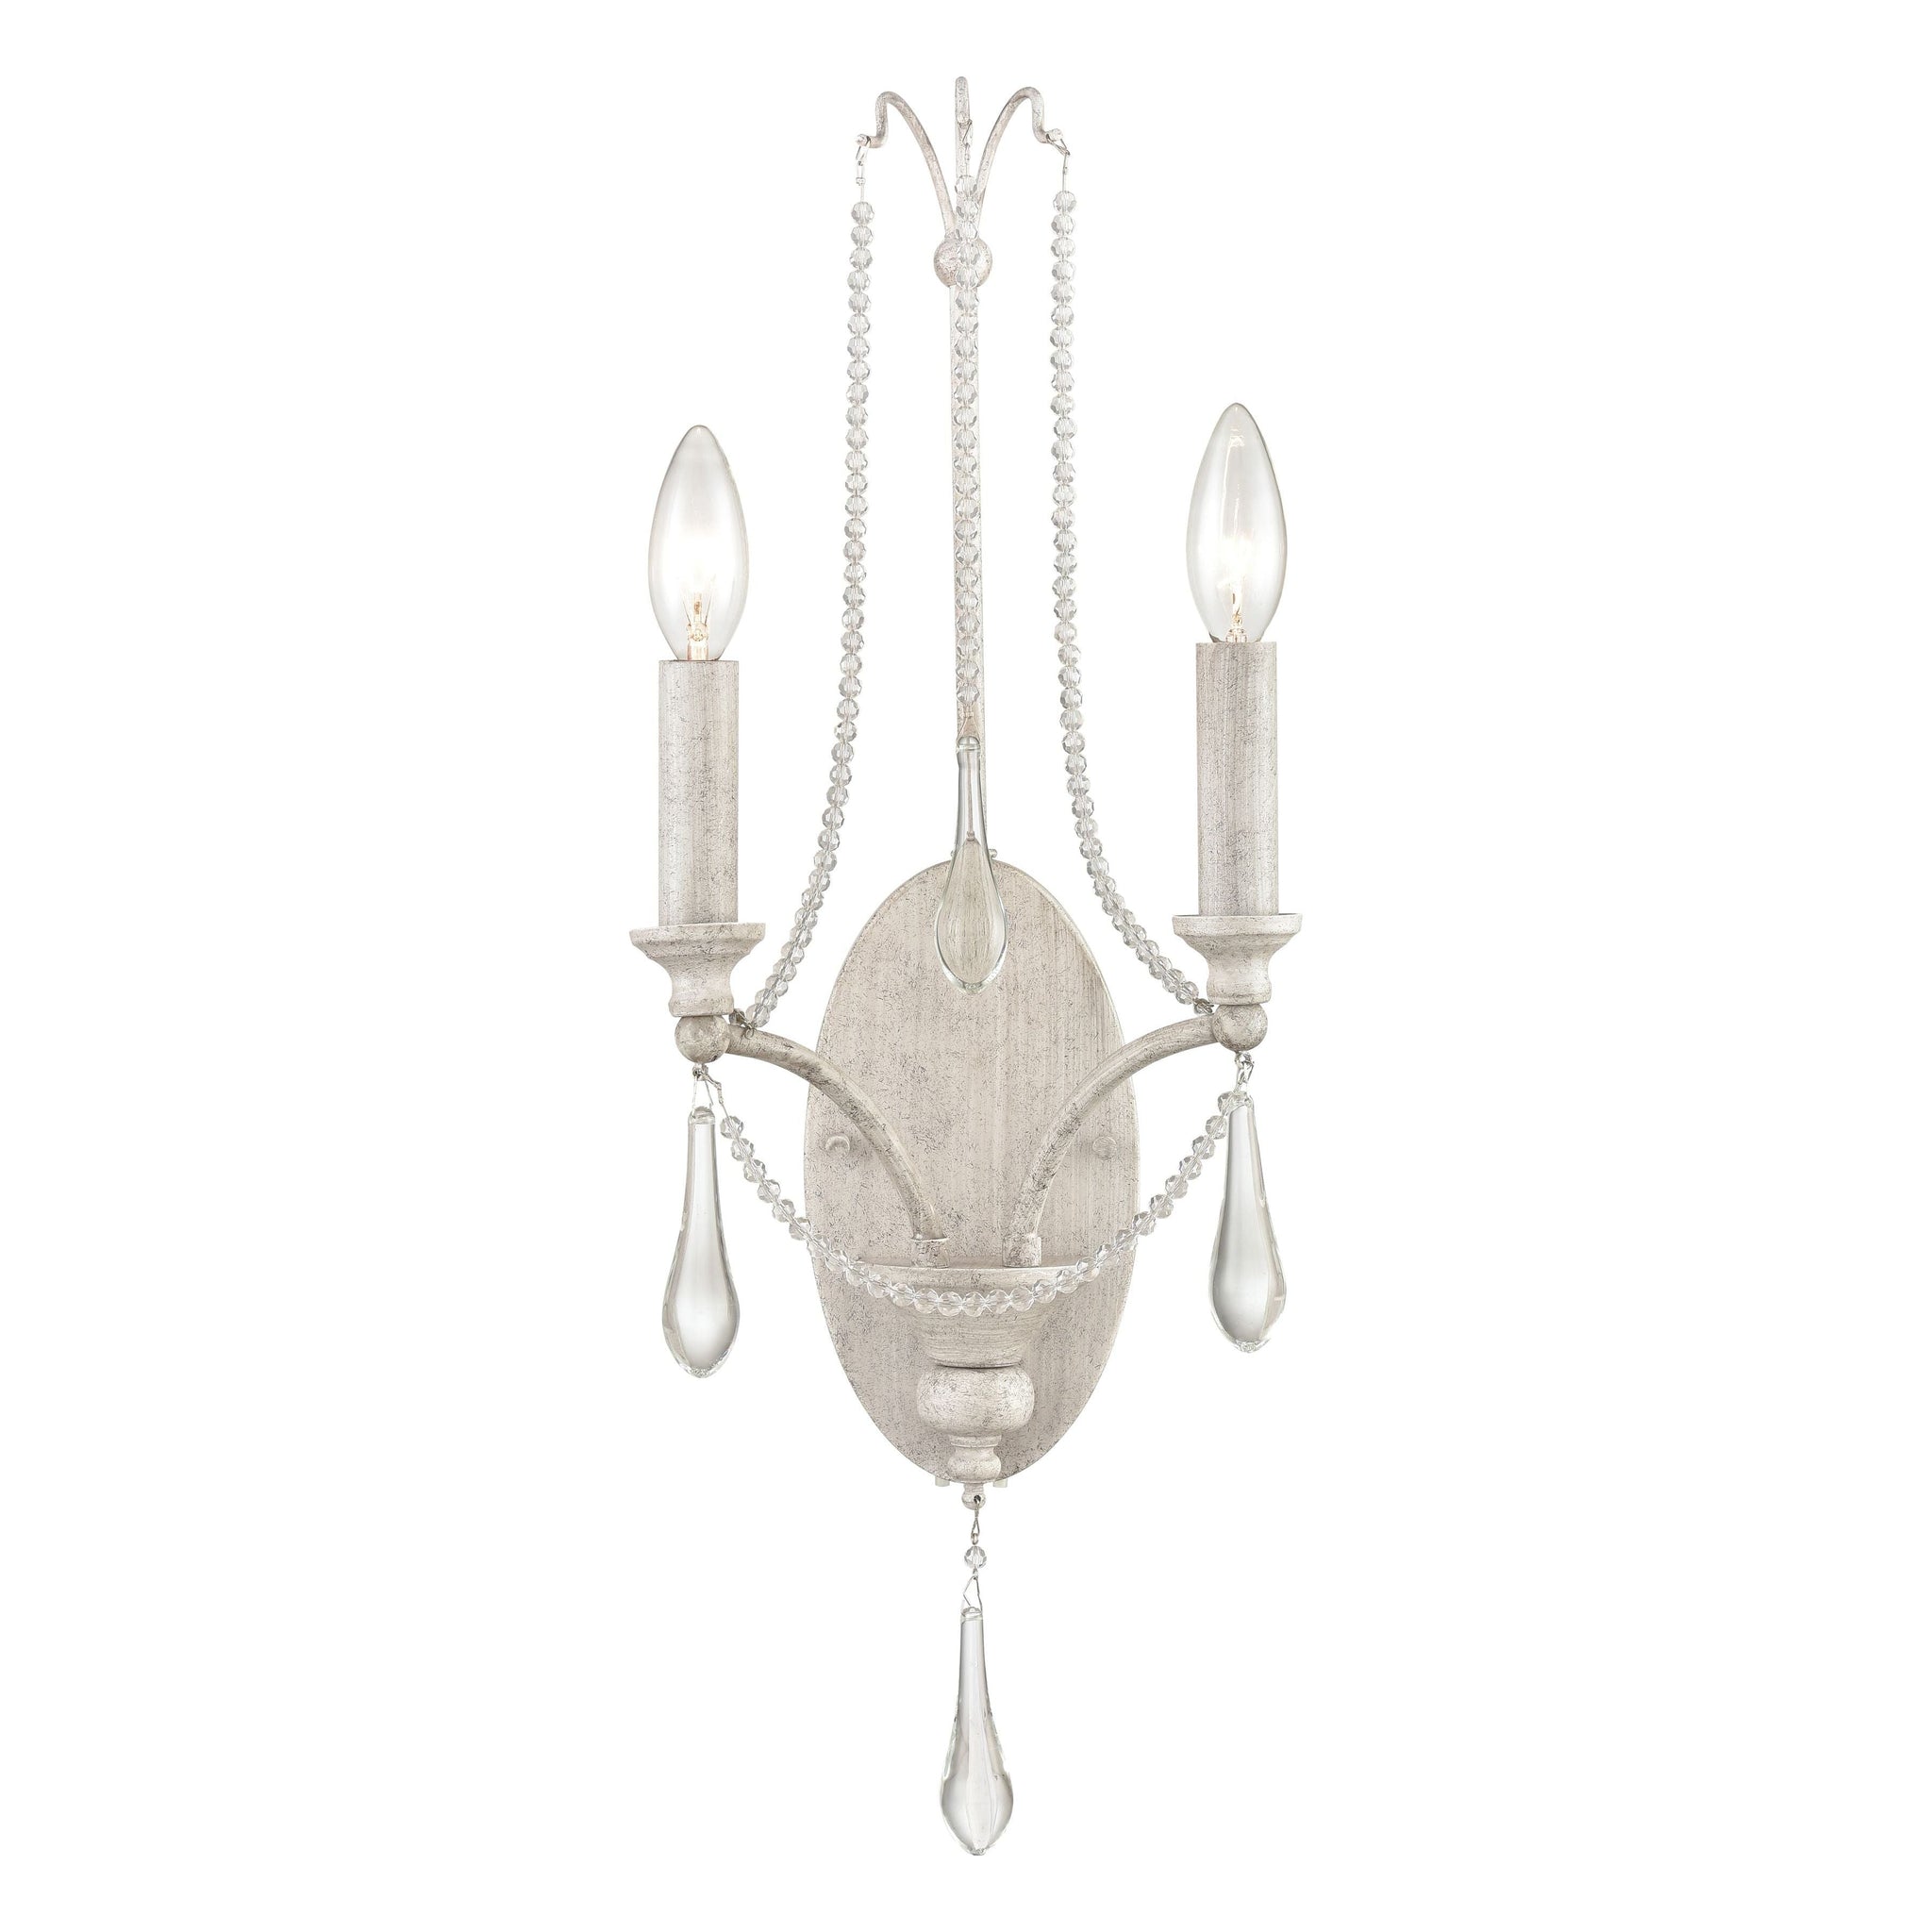 French Parlor 24" High 2-Light Sconce